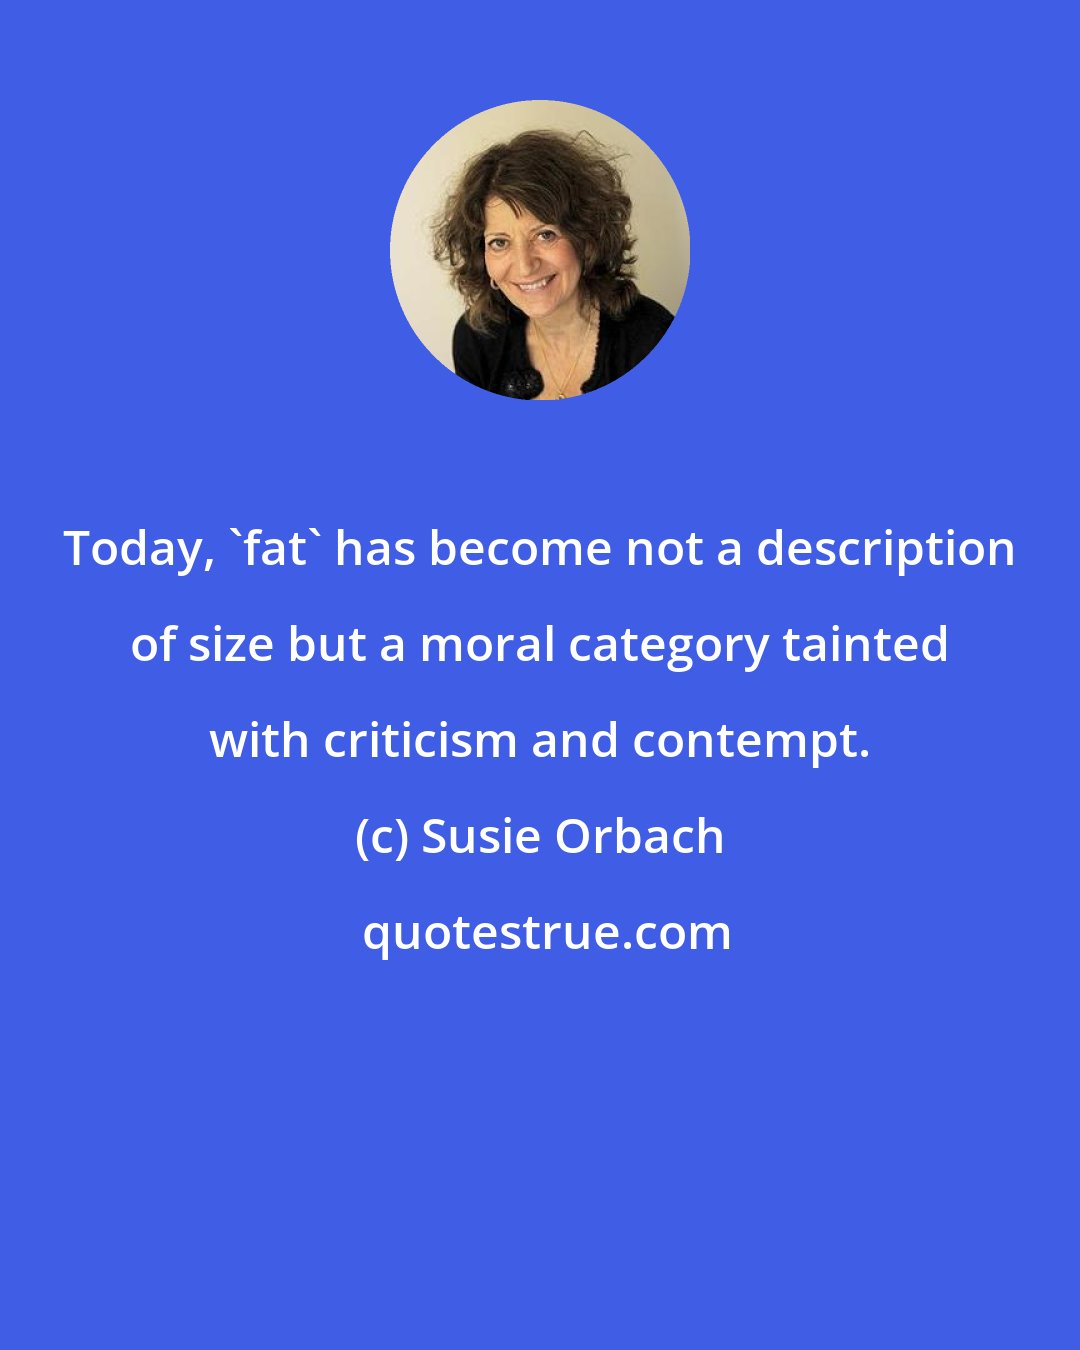 Susie Orbach: Today, 'fat' has become not a description of size but a moral category tainted with criticism and contempt.